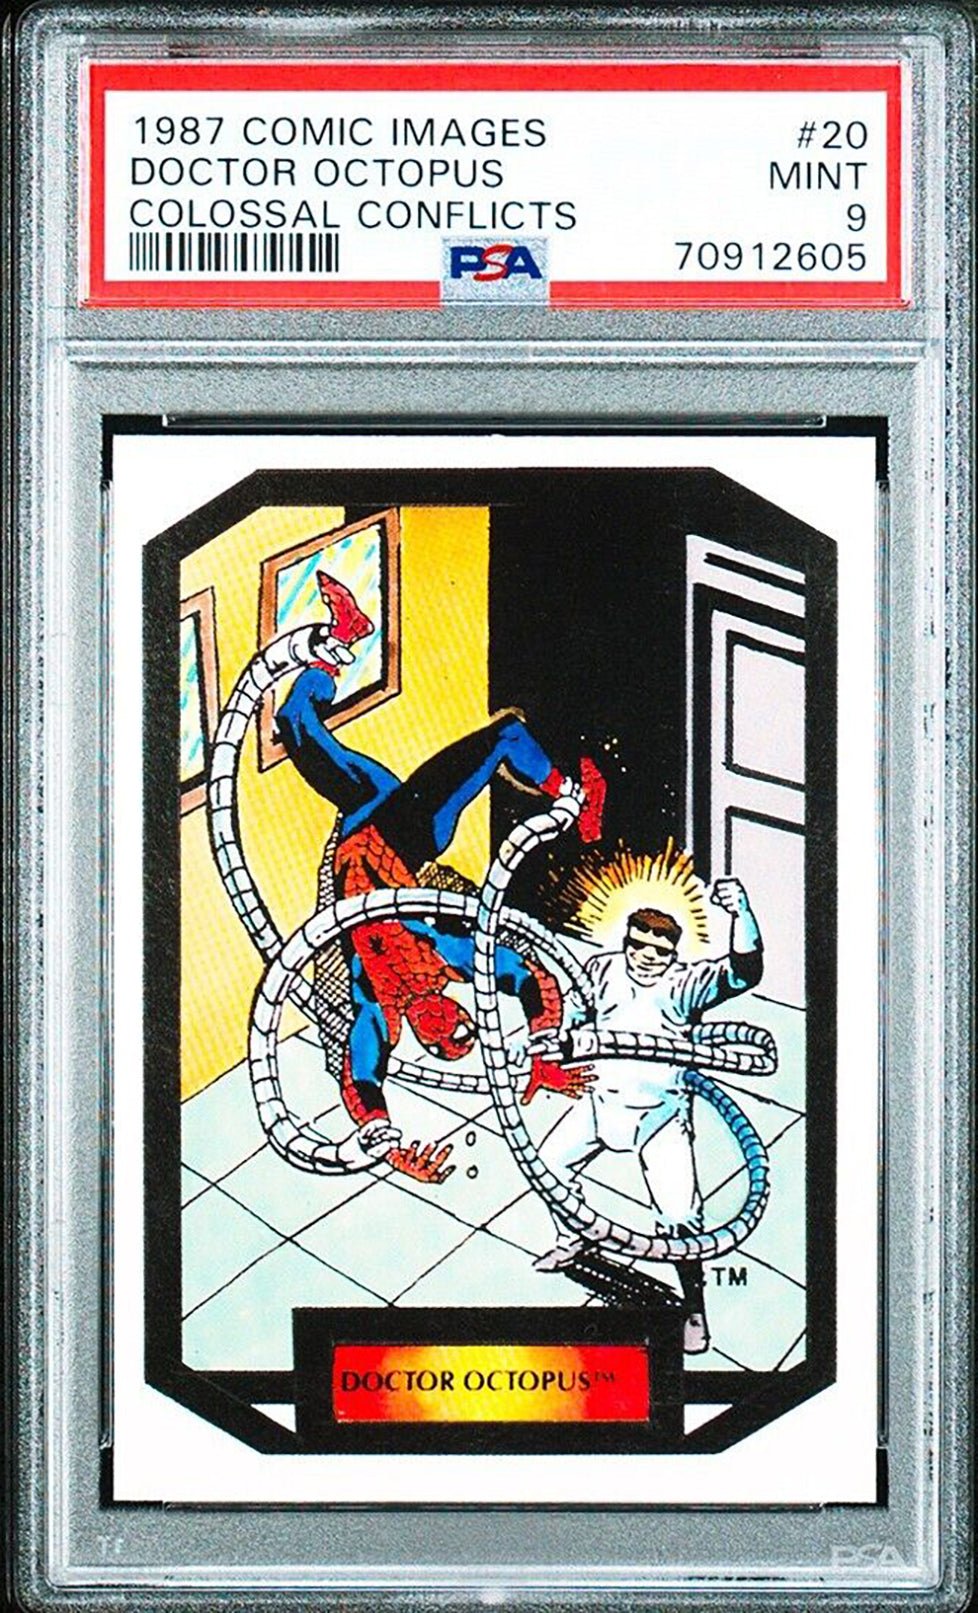 DOCTOR OCTOPUS SPIDER-MAN PSA 9 1987 Comic Images Colossal Conflicts #20 C1 Marvel Base Graded Cards - Hobby Gems